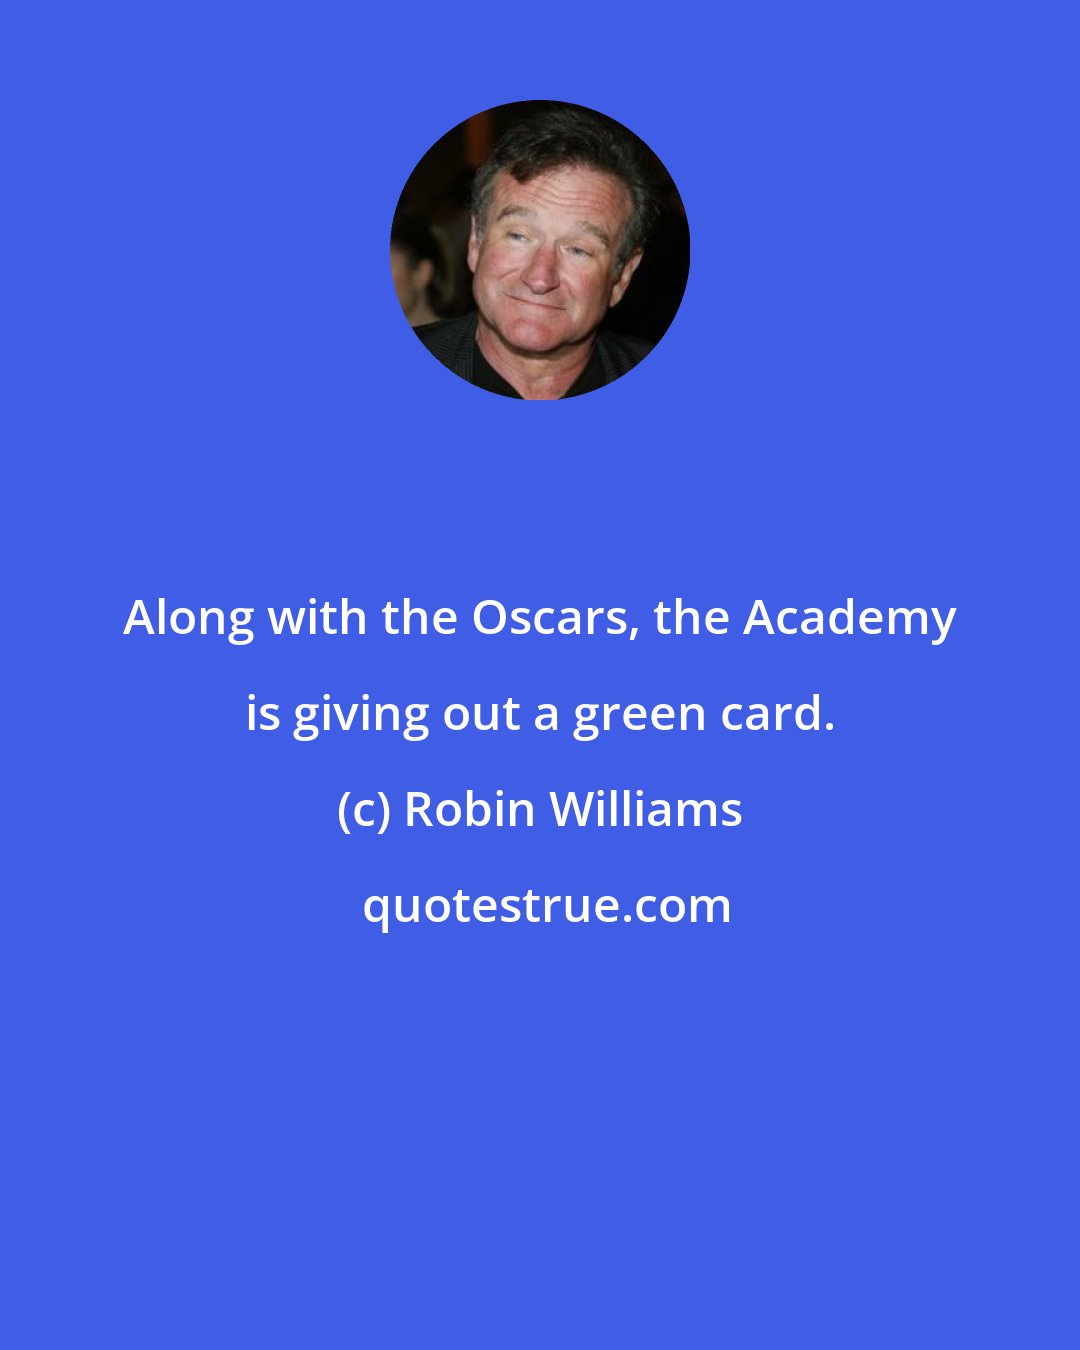 Robin Williams: Along with the Oscars, the Academy is giving out a green card.